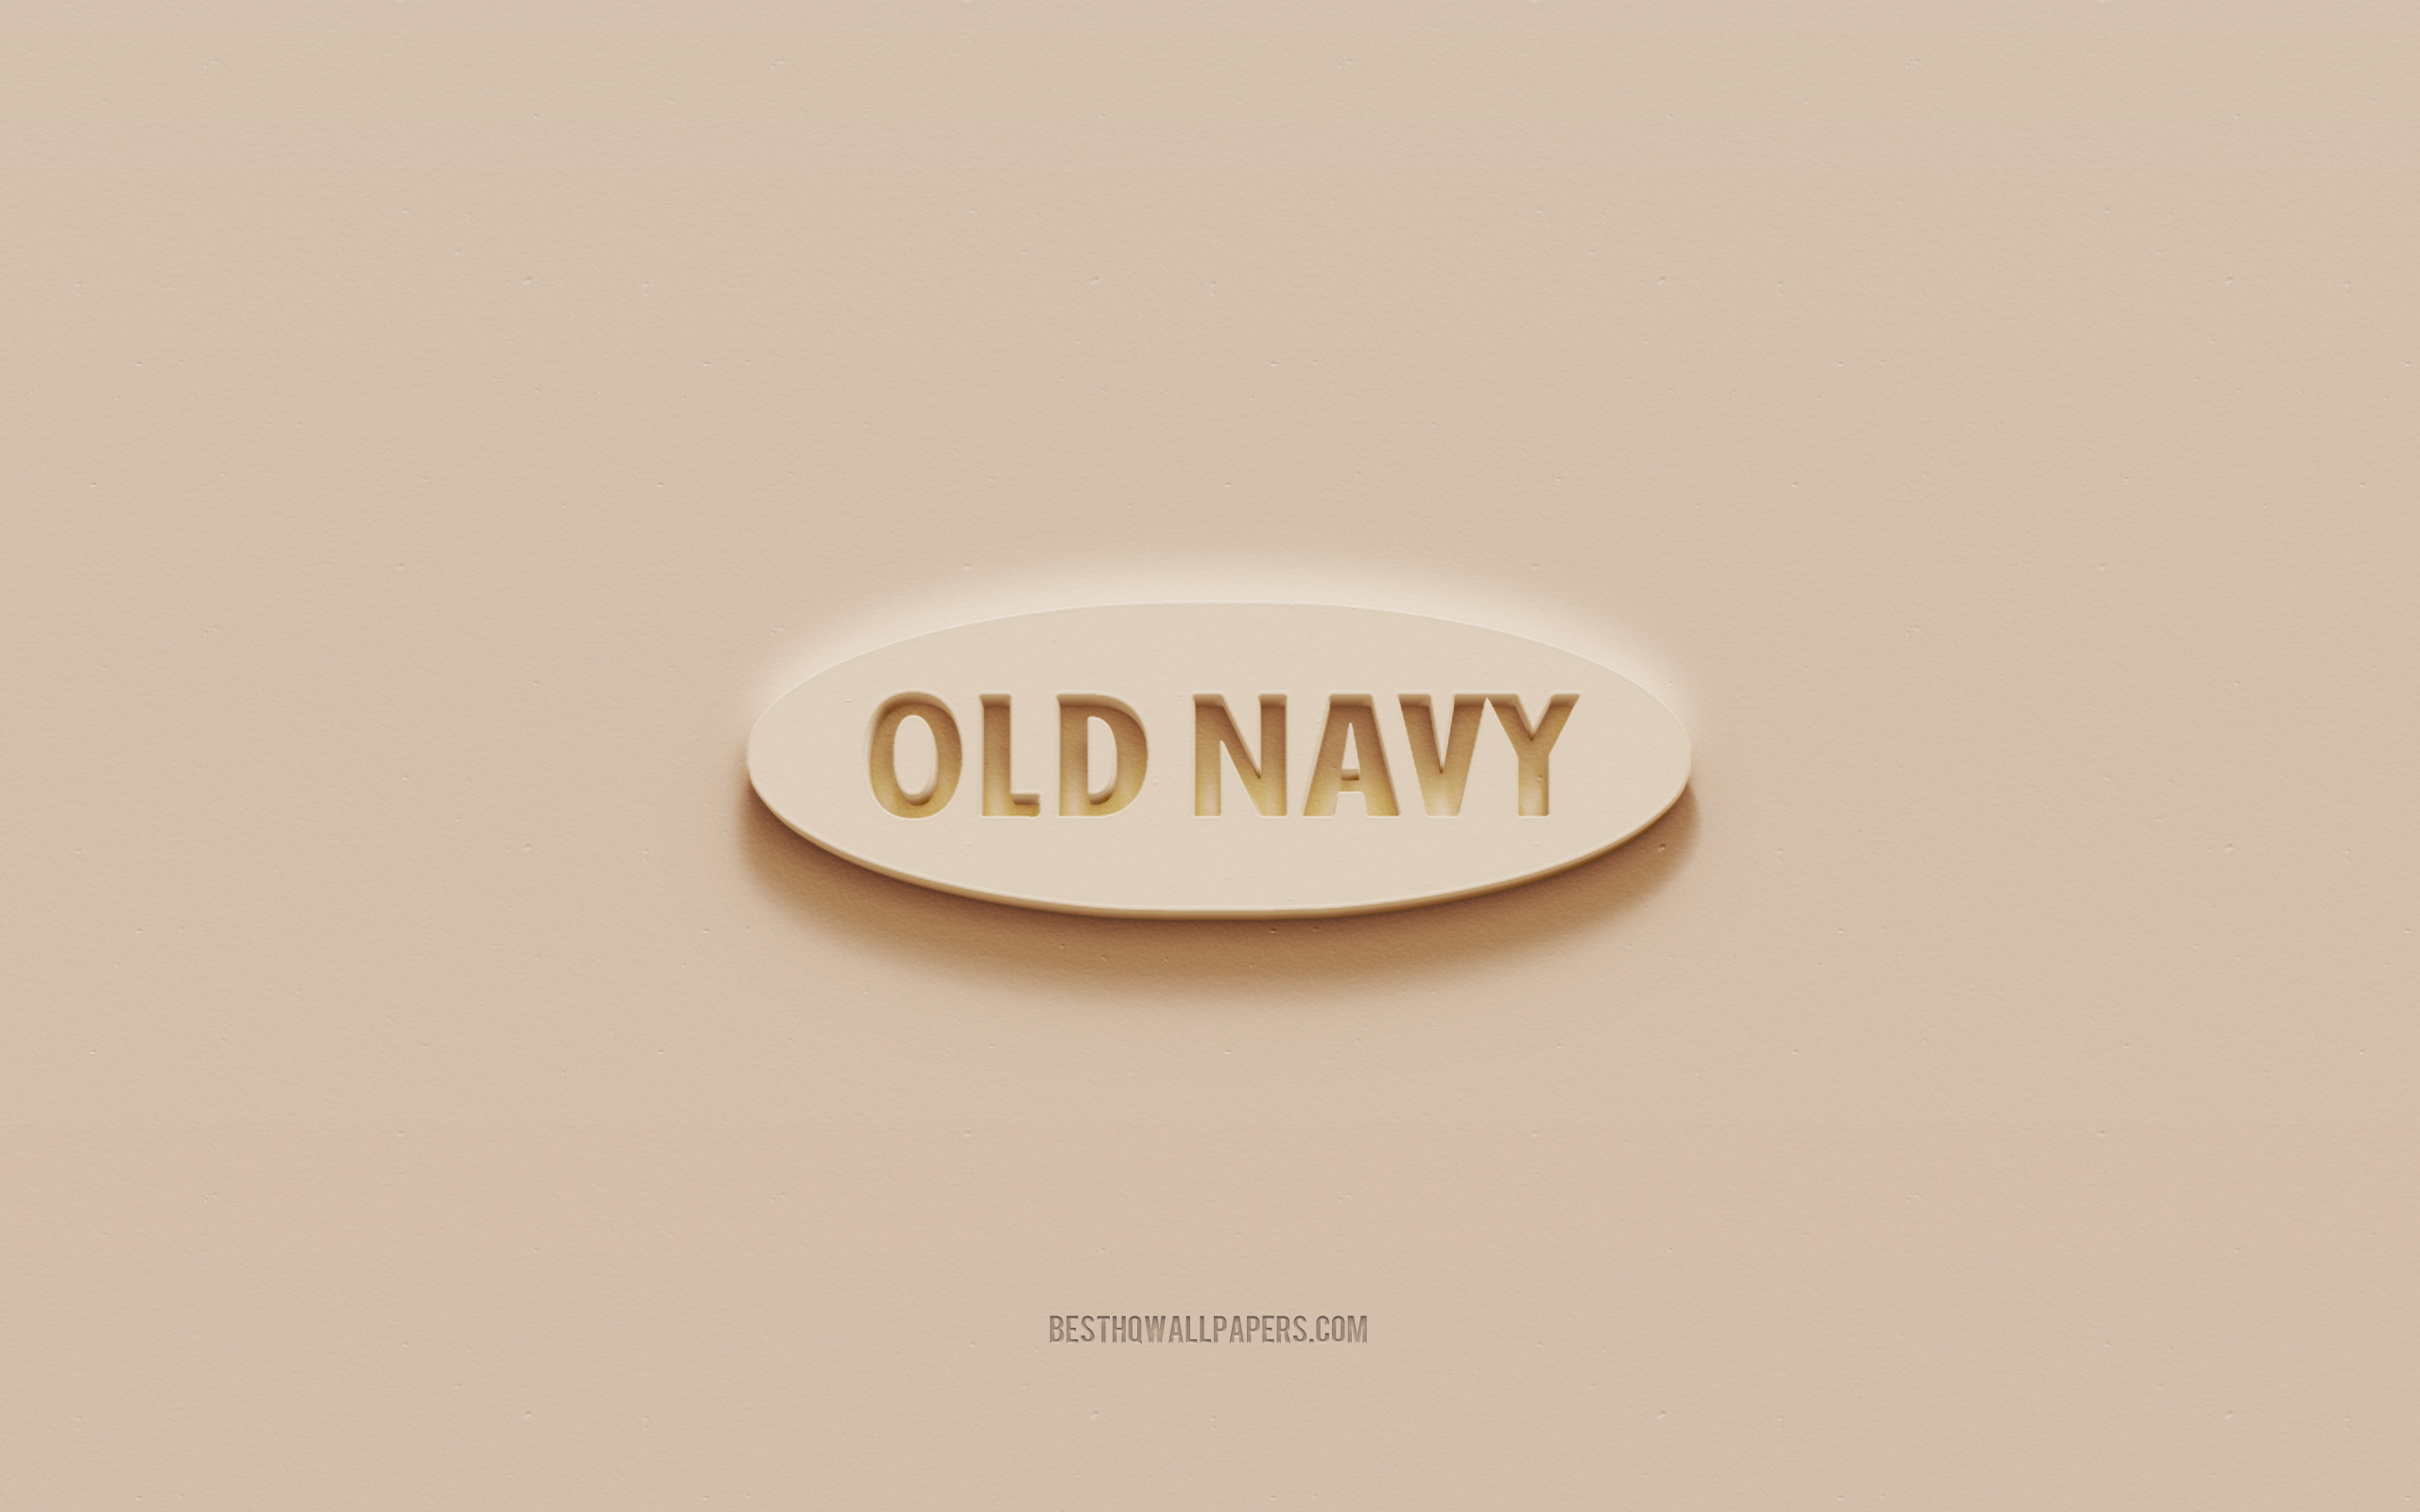 Download wallpaper Old Navy logo, brown plaster background, Old Navy 3D logo, brands, Old Navy emblem, 3D art, Old Navy for desktop with resolution 2560x1600. High Quality HD picture wallpaper